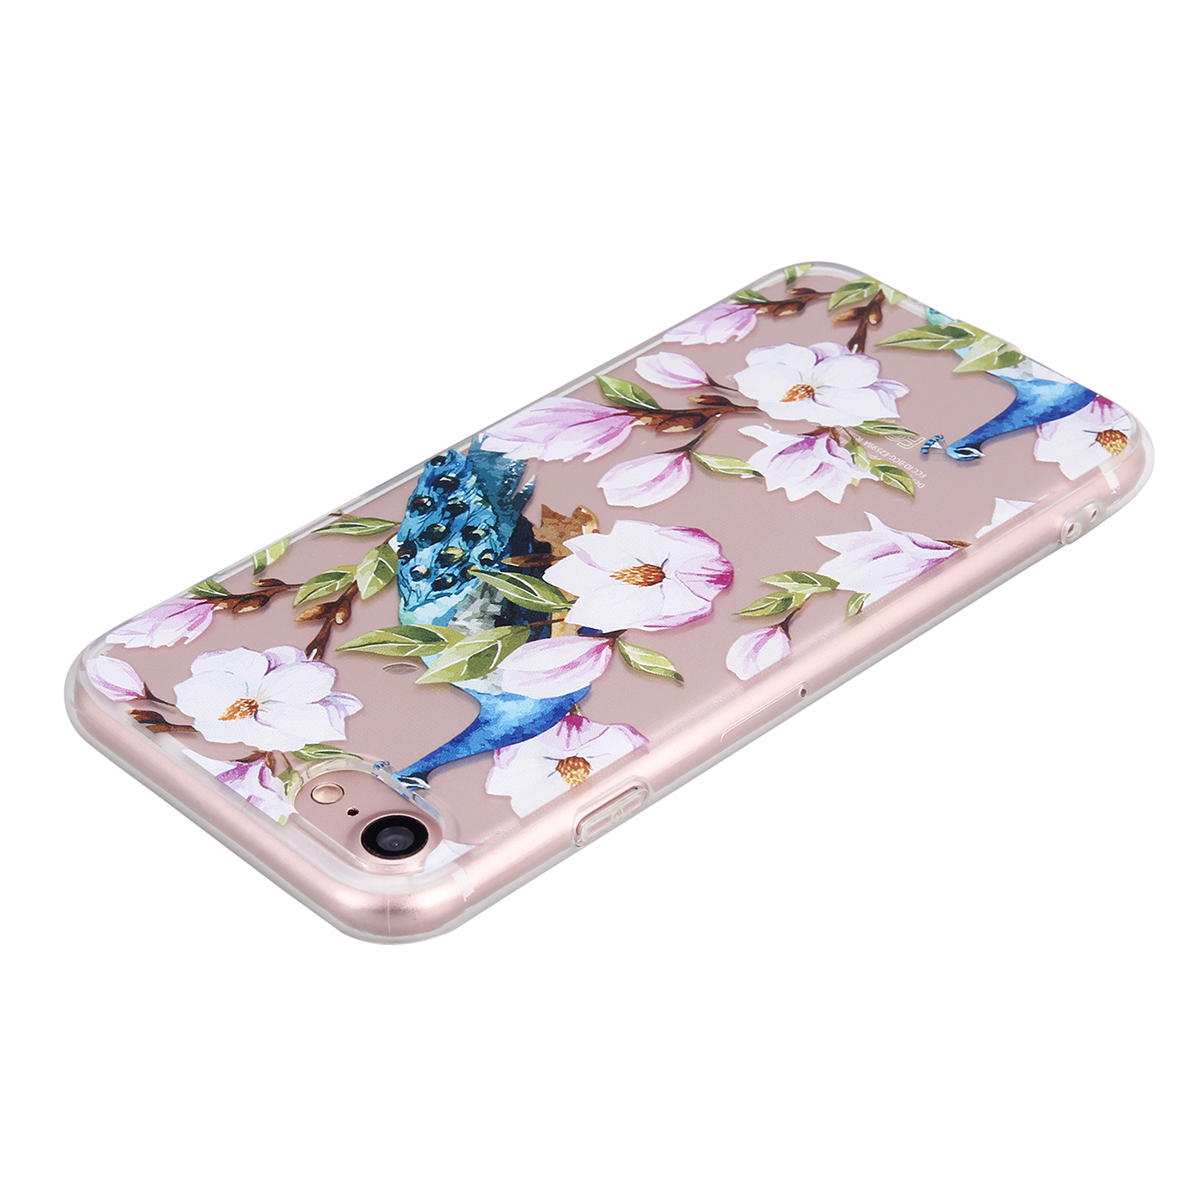 New Slim Soft TPU Transparent Printing Phone Case for iPhone 7 - Peacock